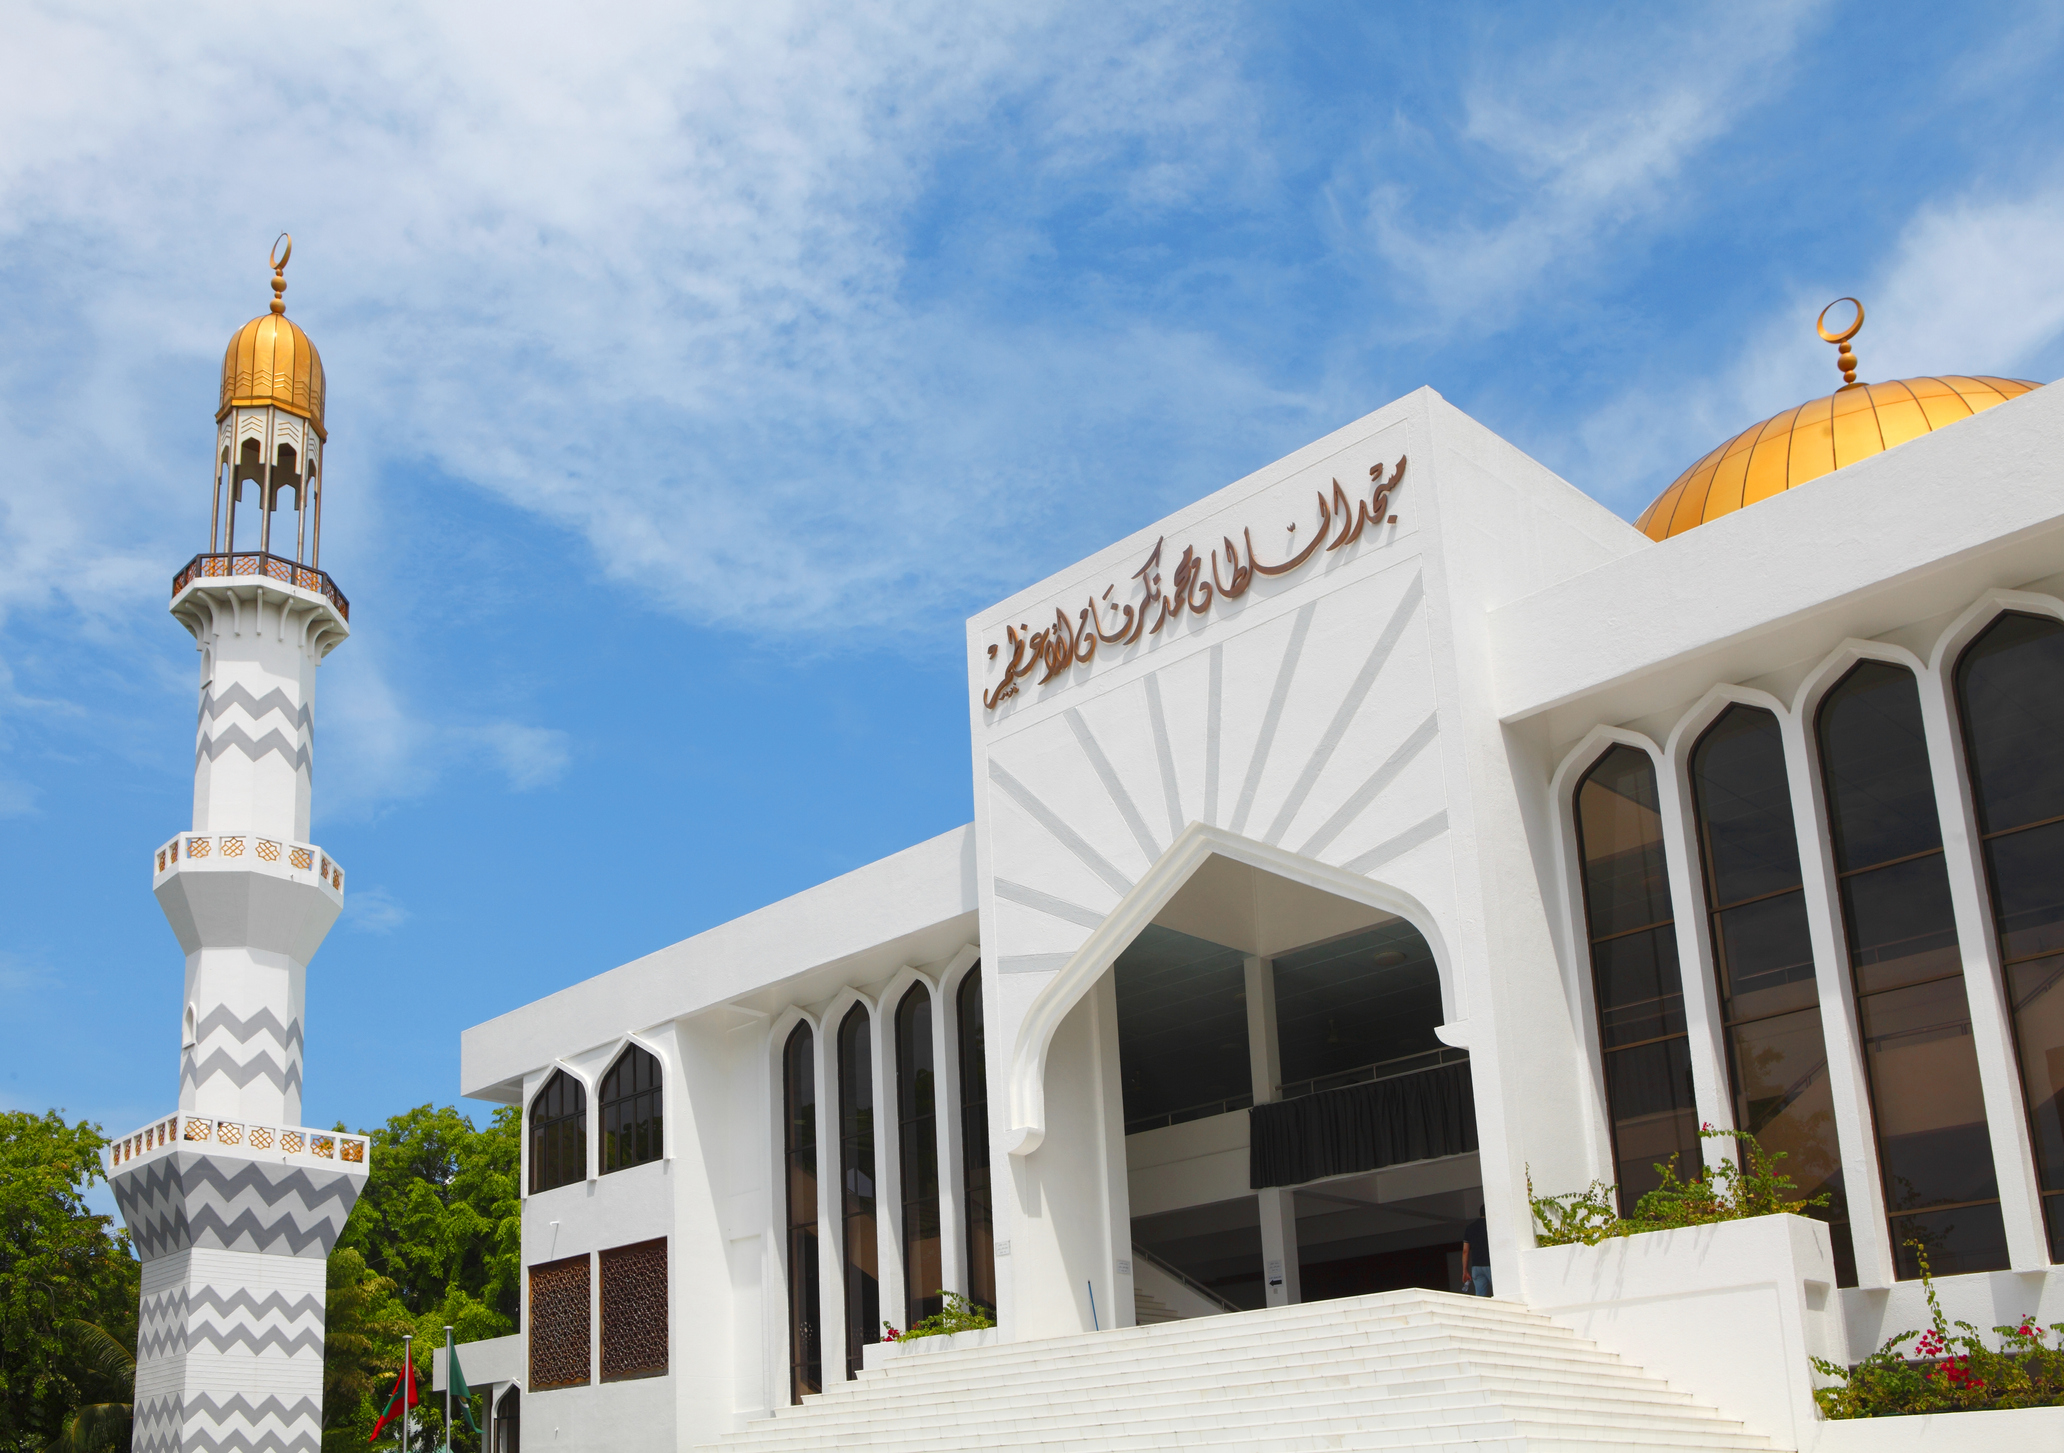 Mosque in the Maldives